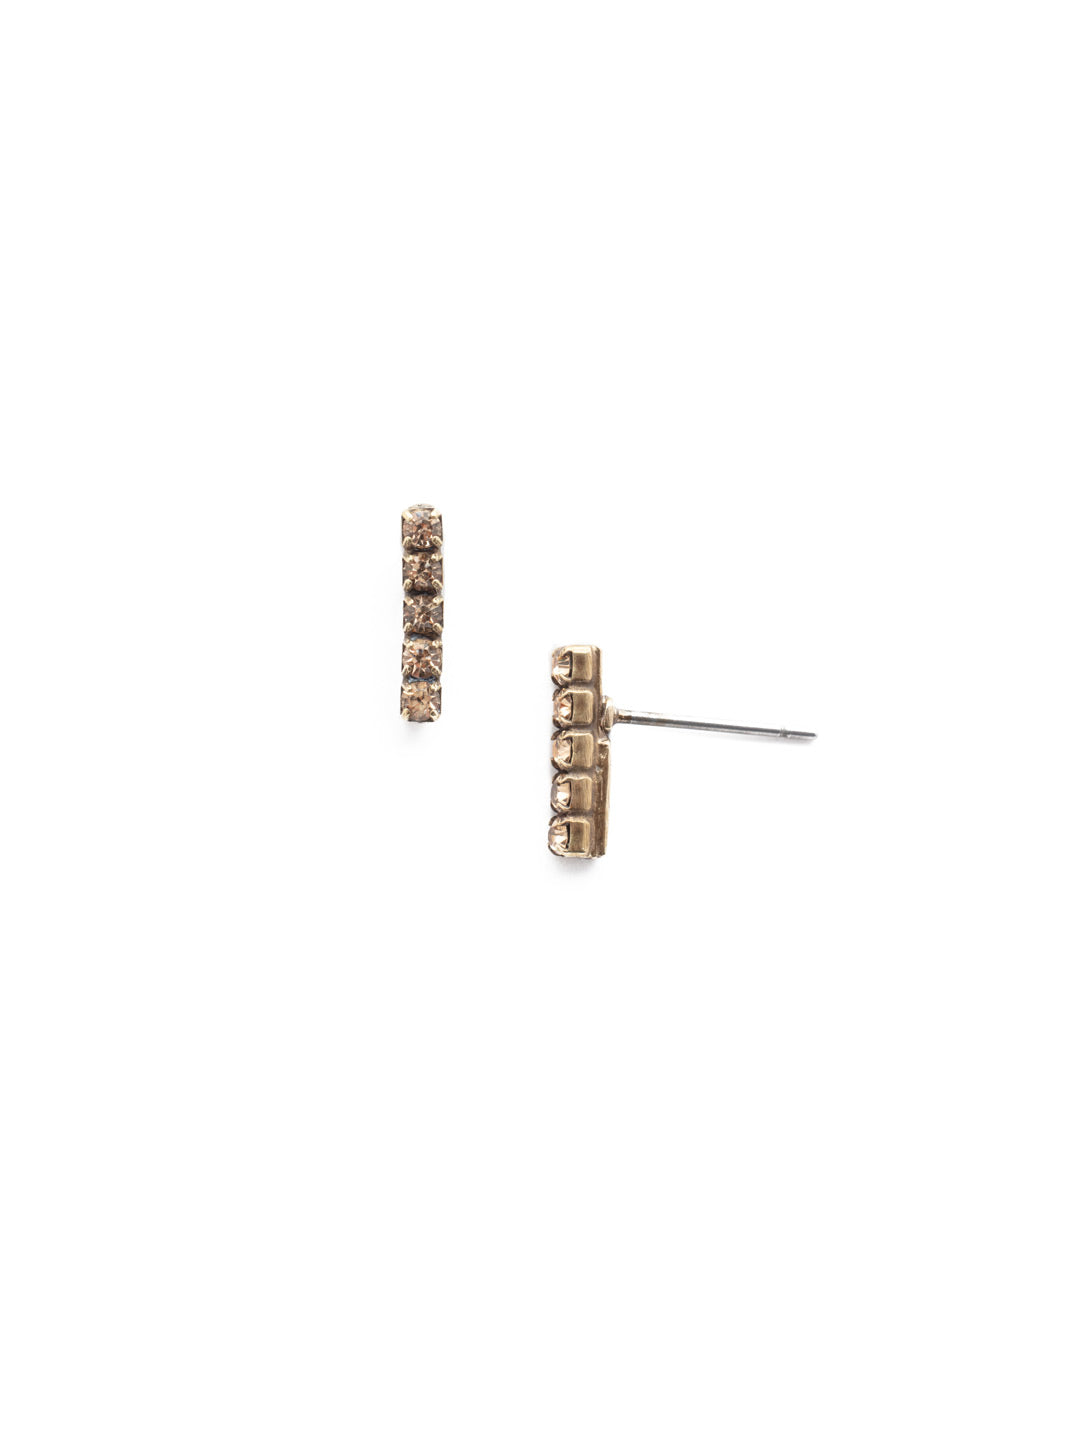 Raina Stud Earring - EDD1AGMIR - <p>Stacked just right! Five round crystals form a petite line in this modern post earring. From Sorrelli's Mirage collection in our Antique Gold-tone finish.</p>